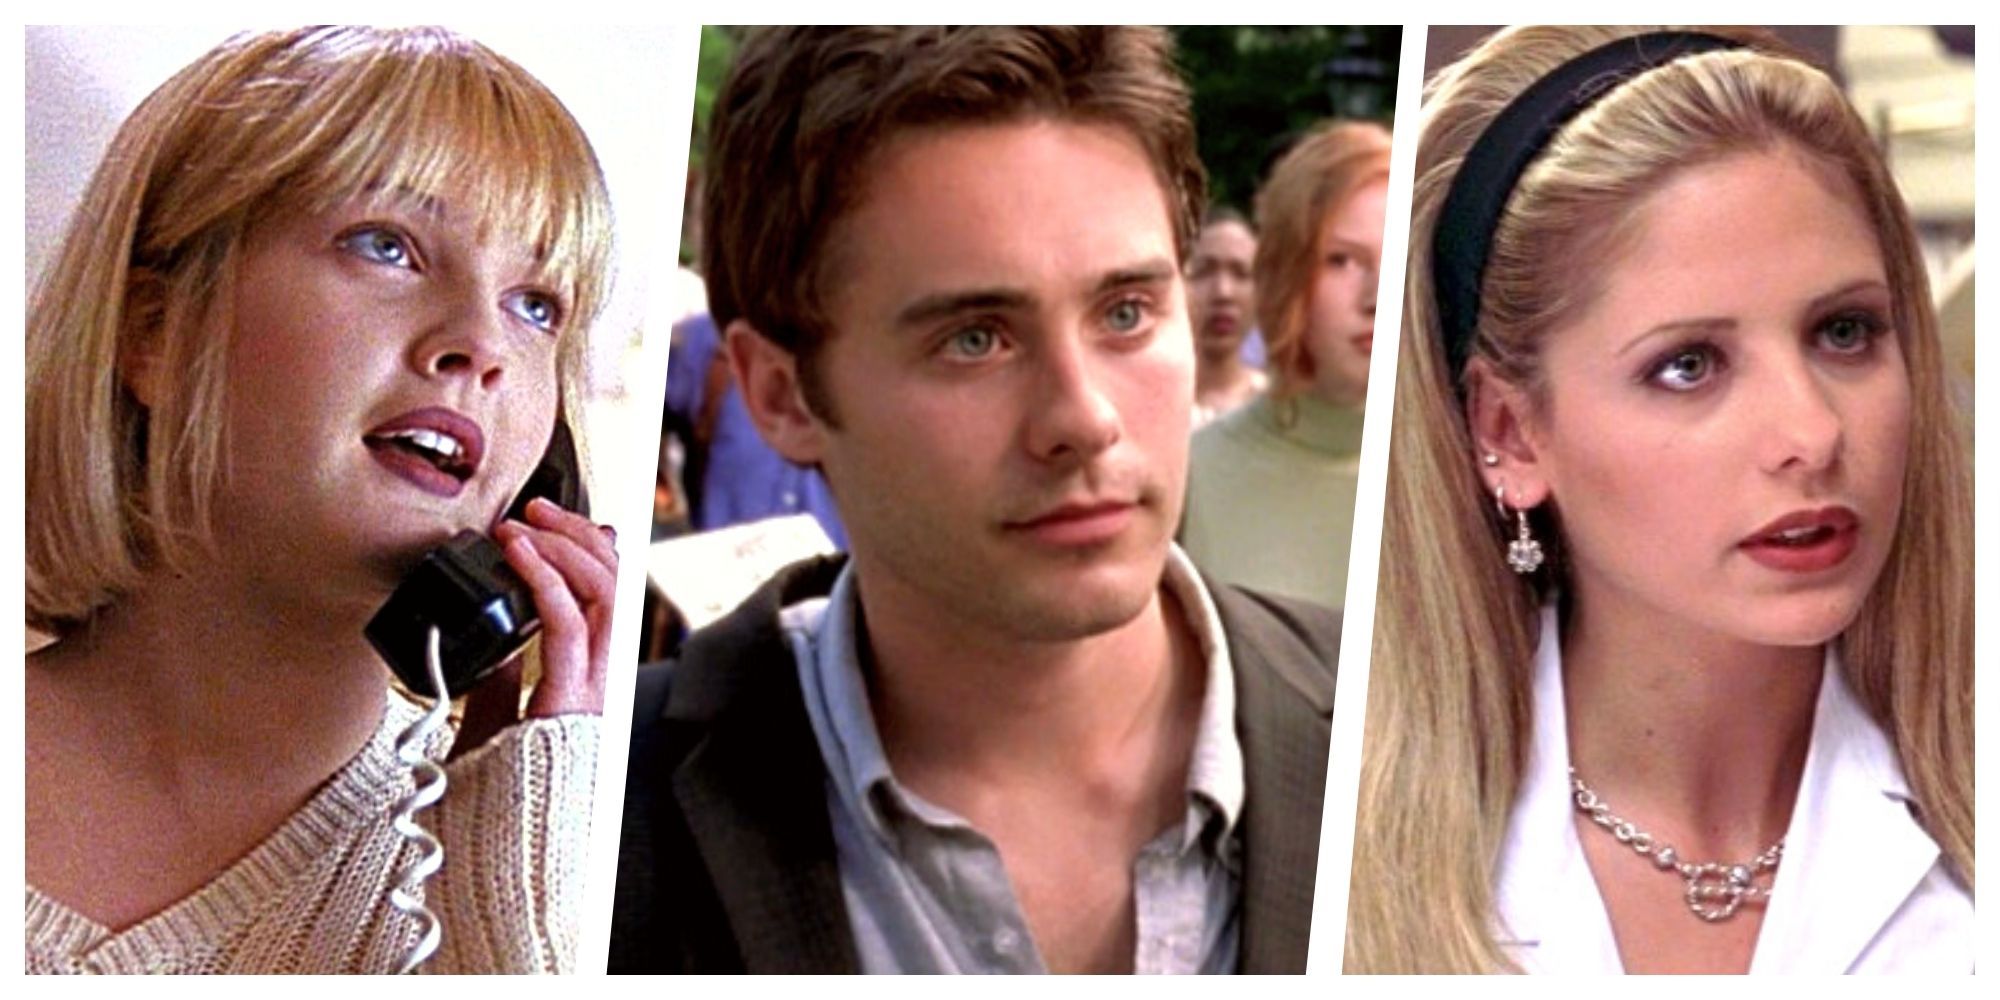 Drew Barrymore in Scream,Jared Leto in Urban Legend and Sara Michelle Gellar in I Know What you Did Last Summer